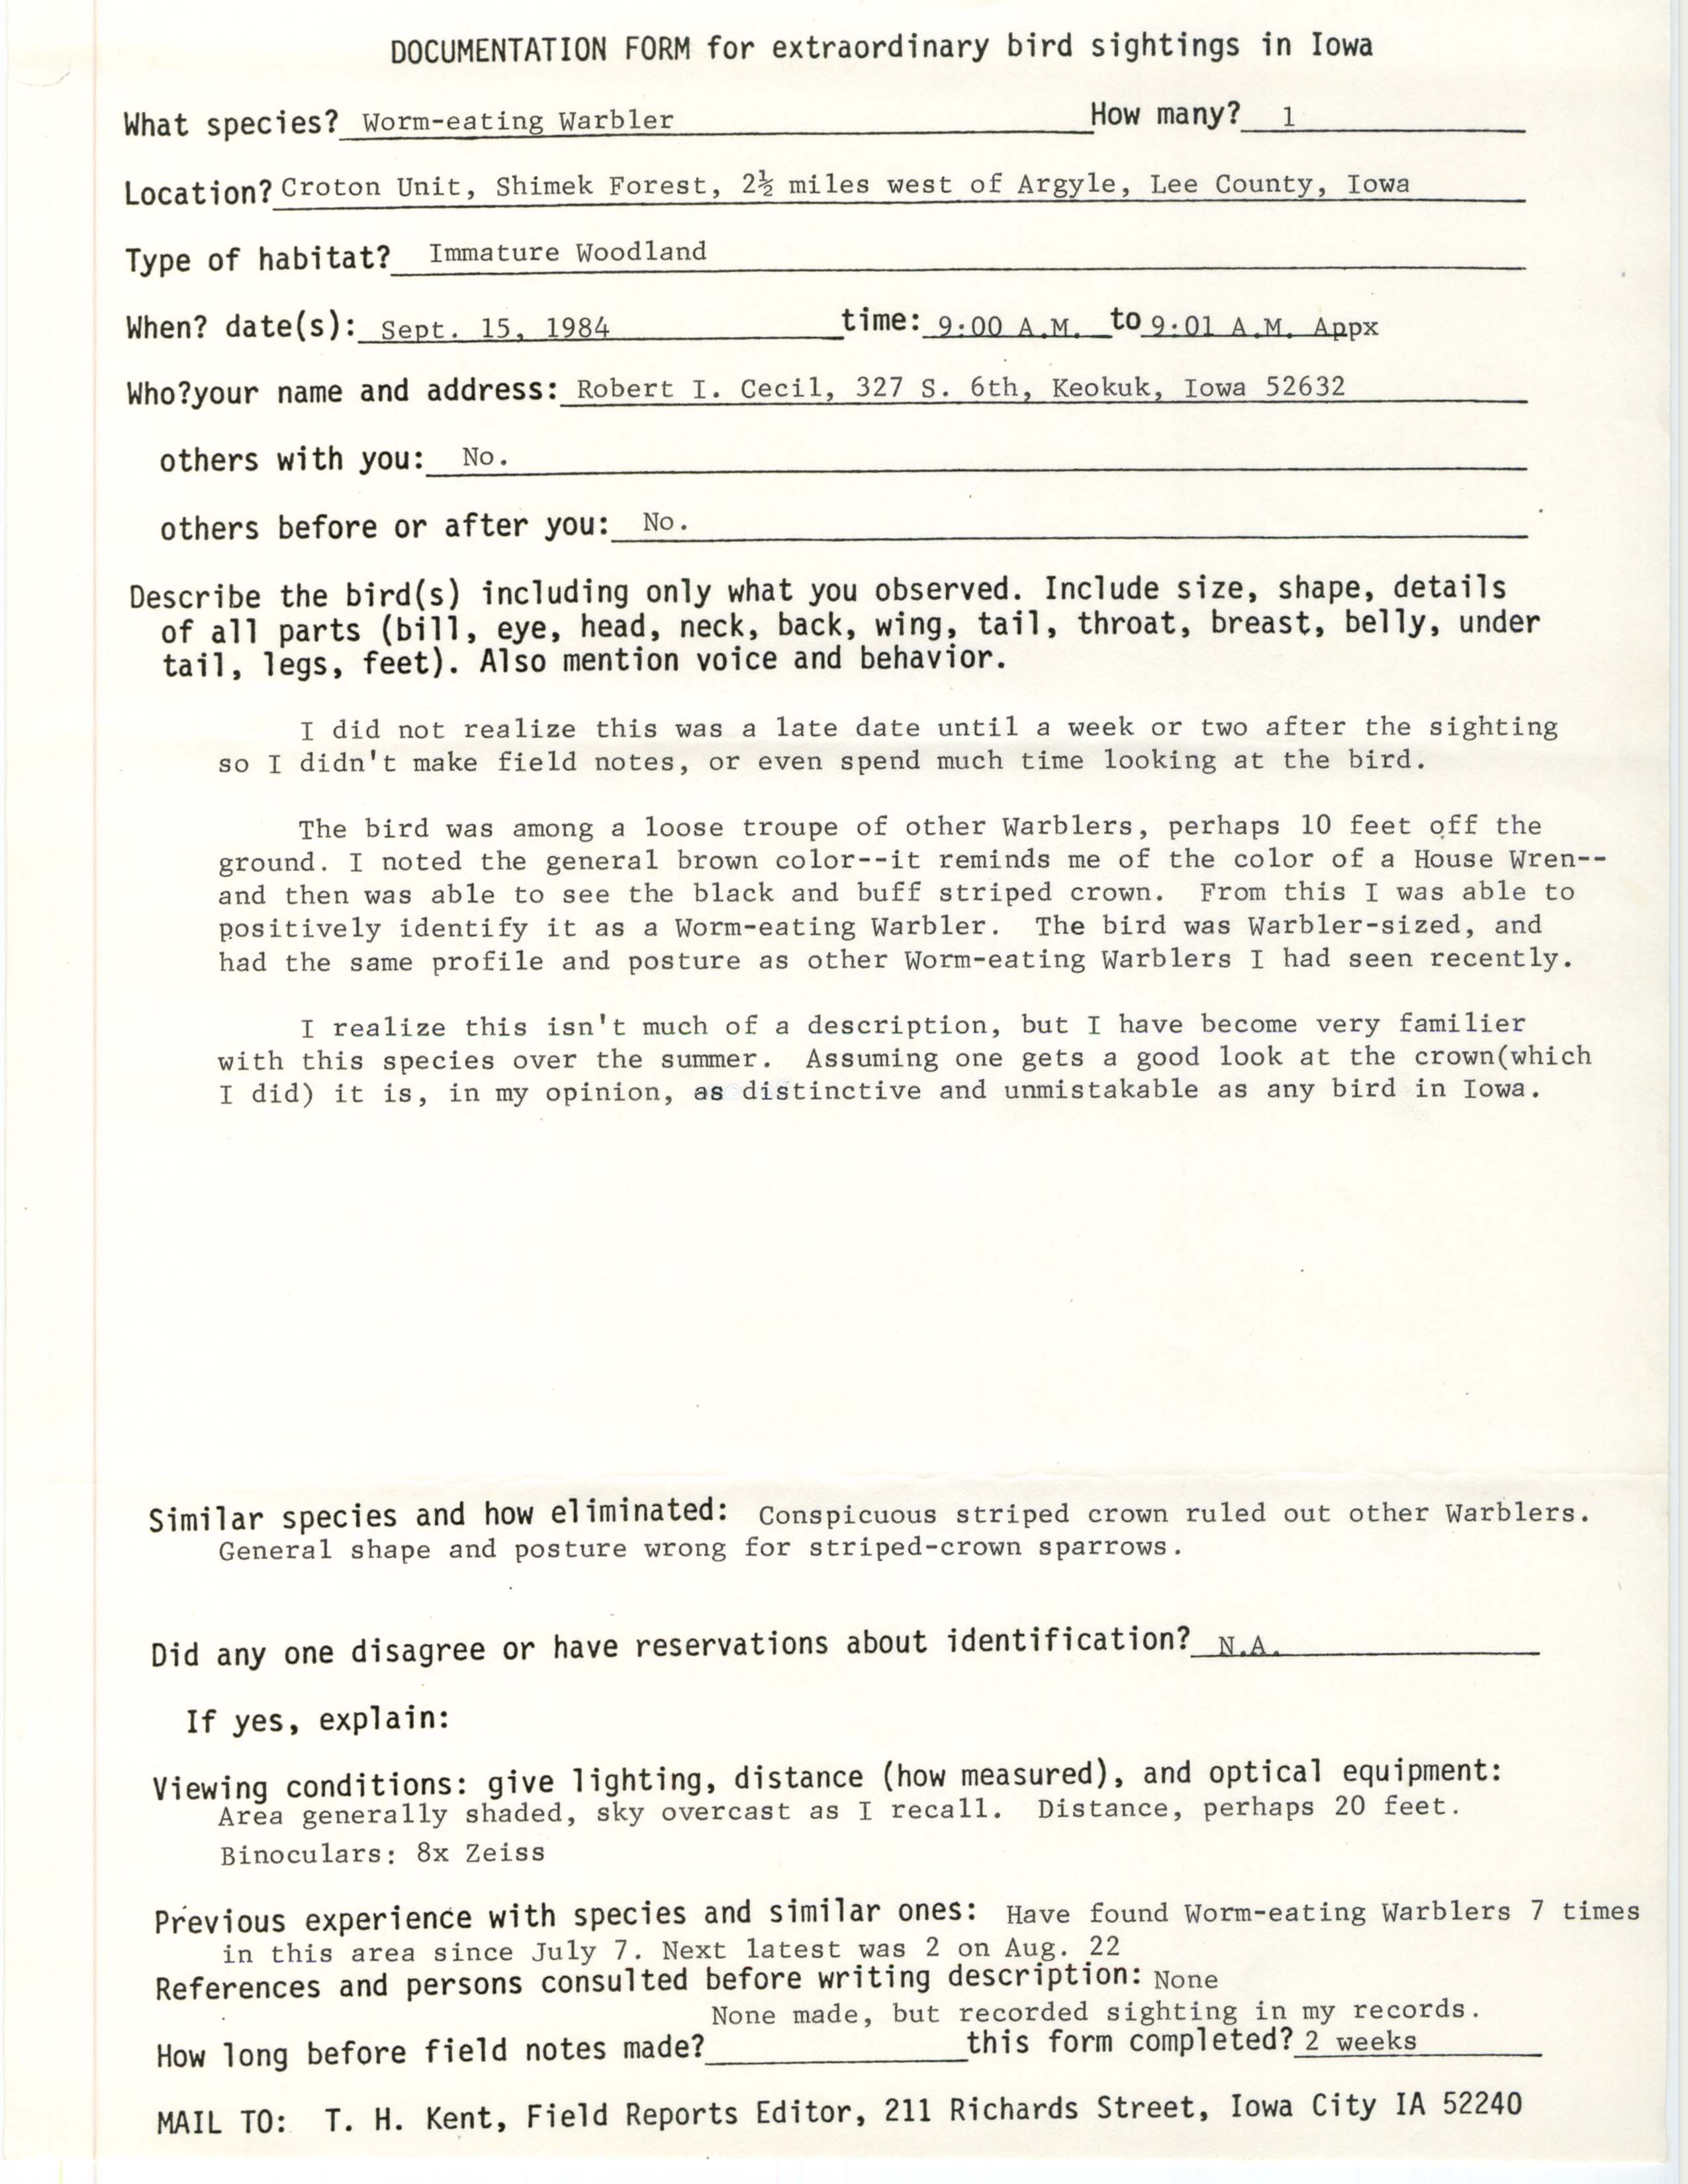 Rare bird documentation form for Worm-eating Warbler at the Croton Unit of Shimek State Forest, 1984